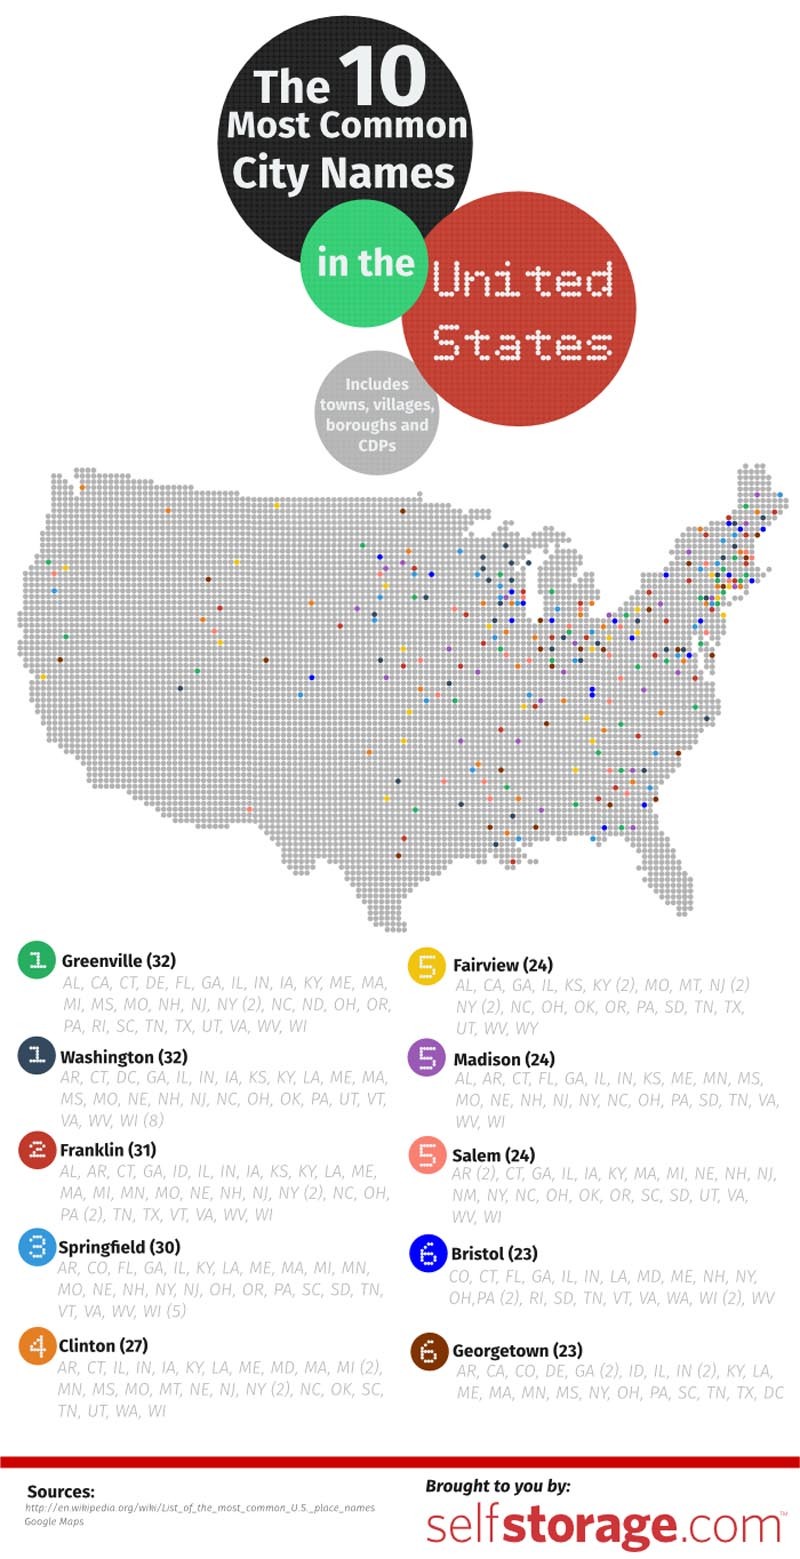 The 10 Most Common City Names in the United States [Infographic]